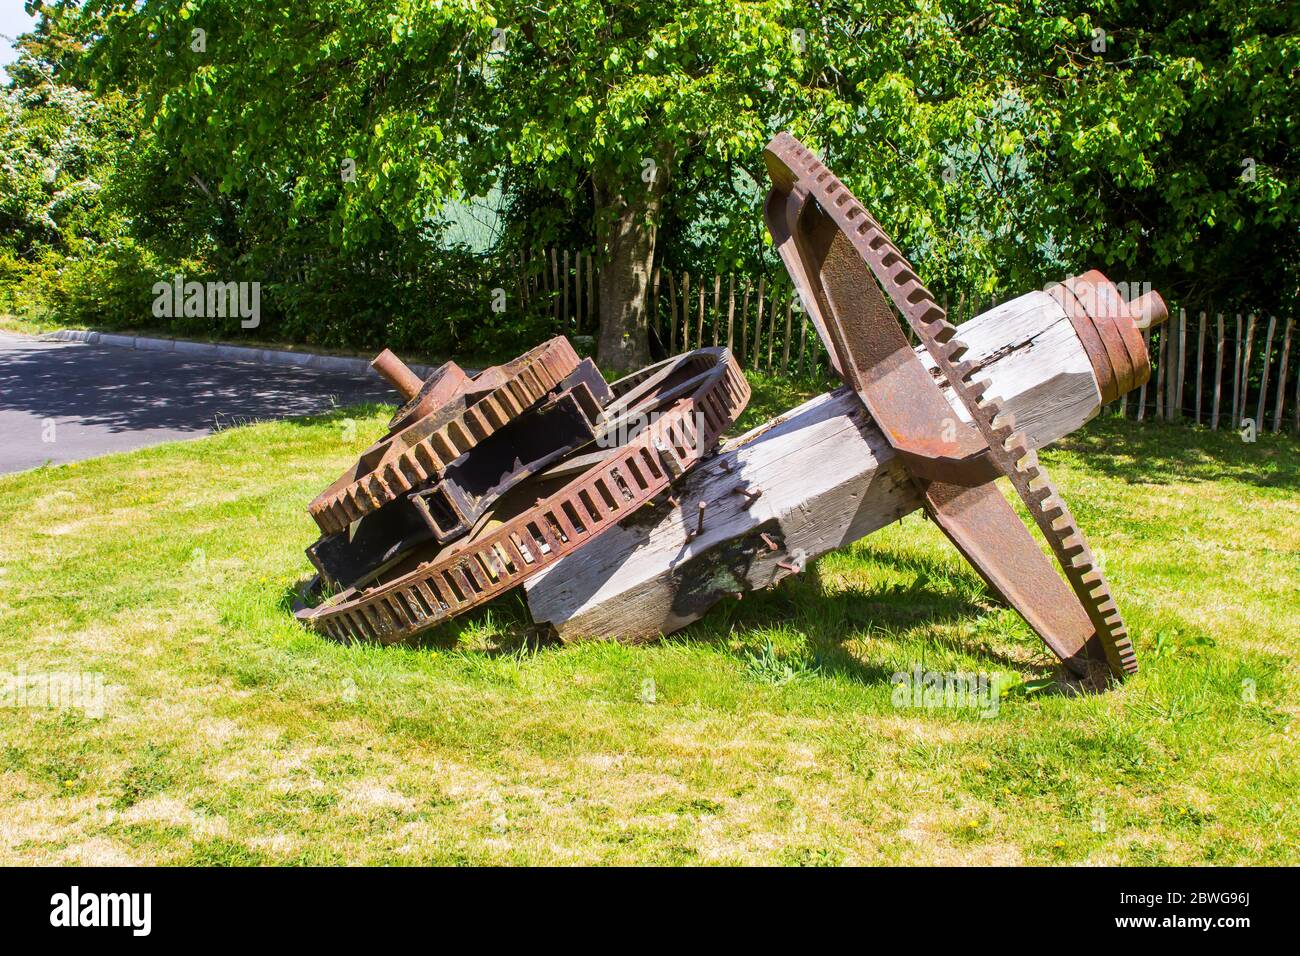 The ancient water wheel drive gear mechanism from the Ballydugan Flour Mill near Downpatrik County Down Northern ireland now used as garden ornaments. Stock Photo